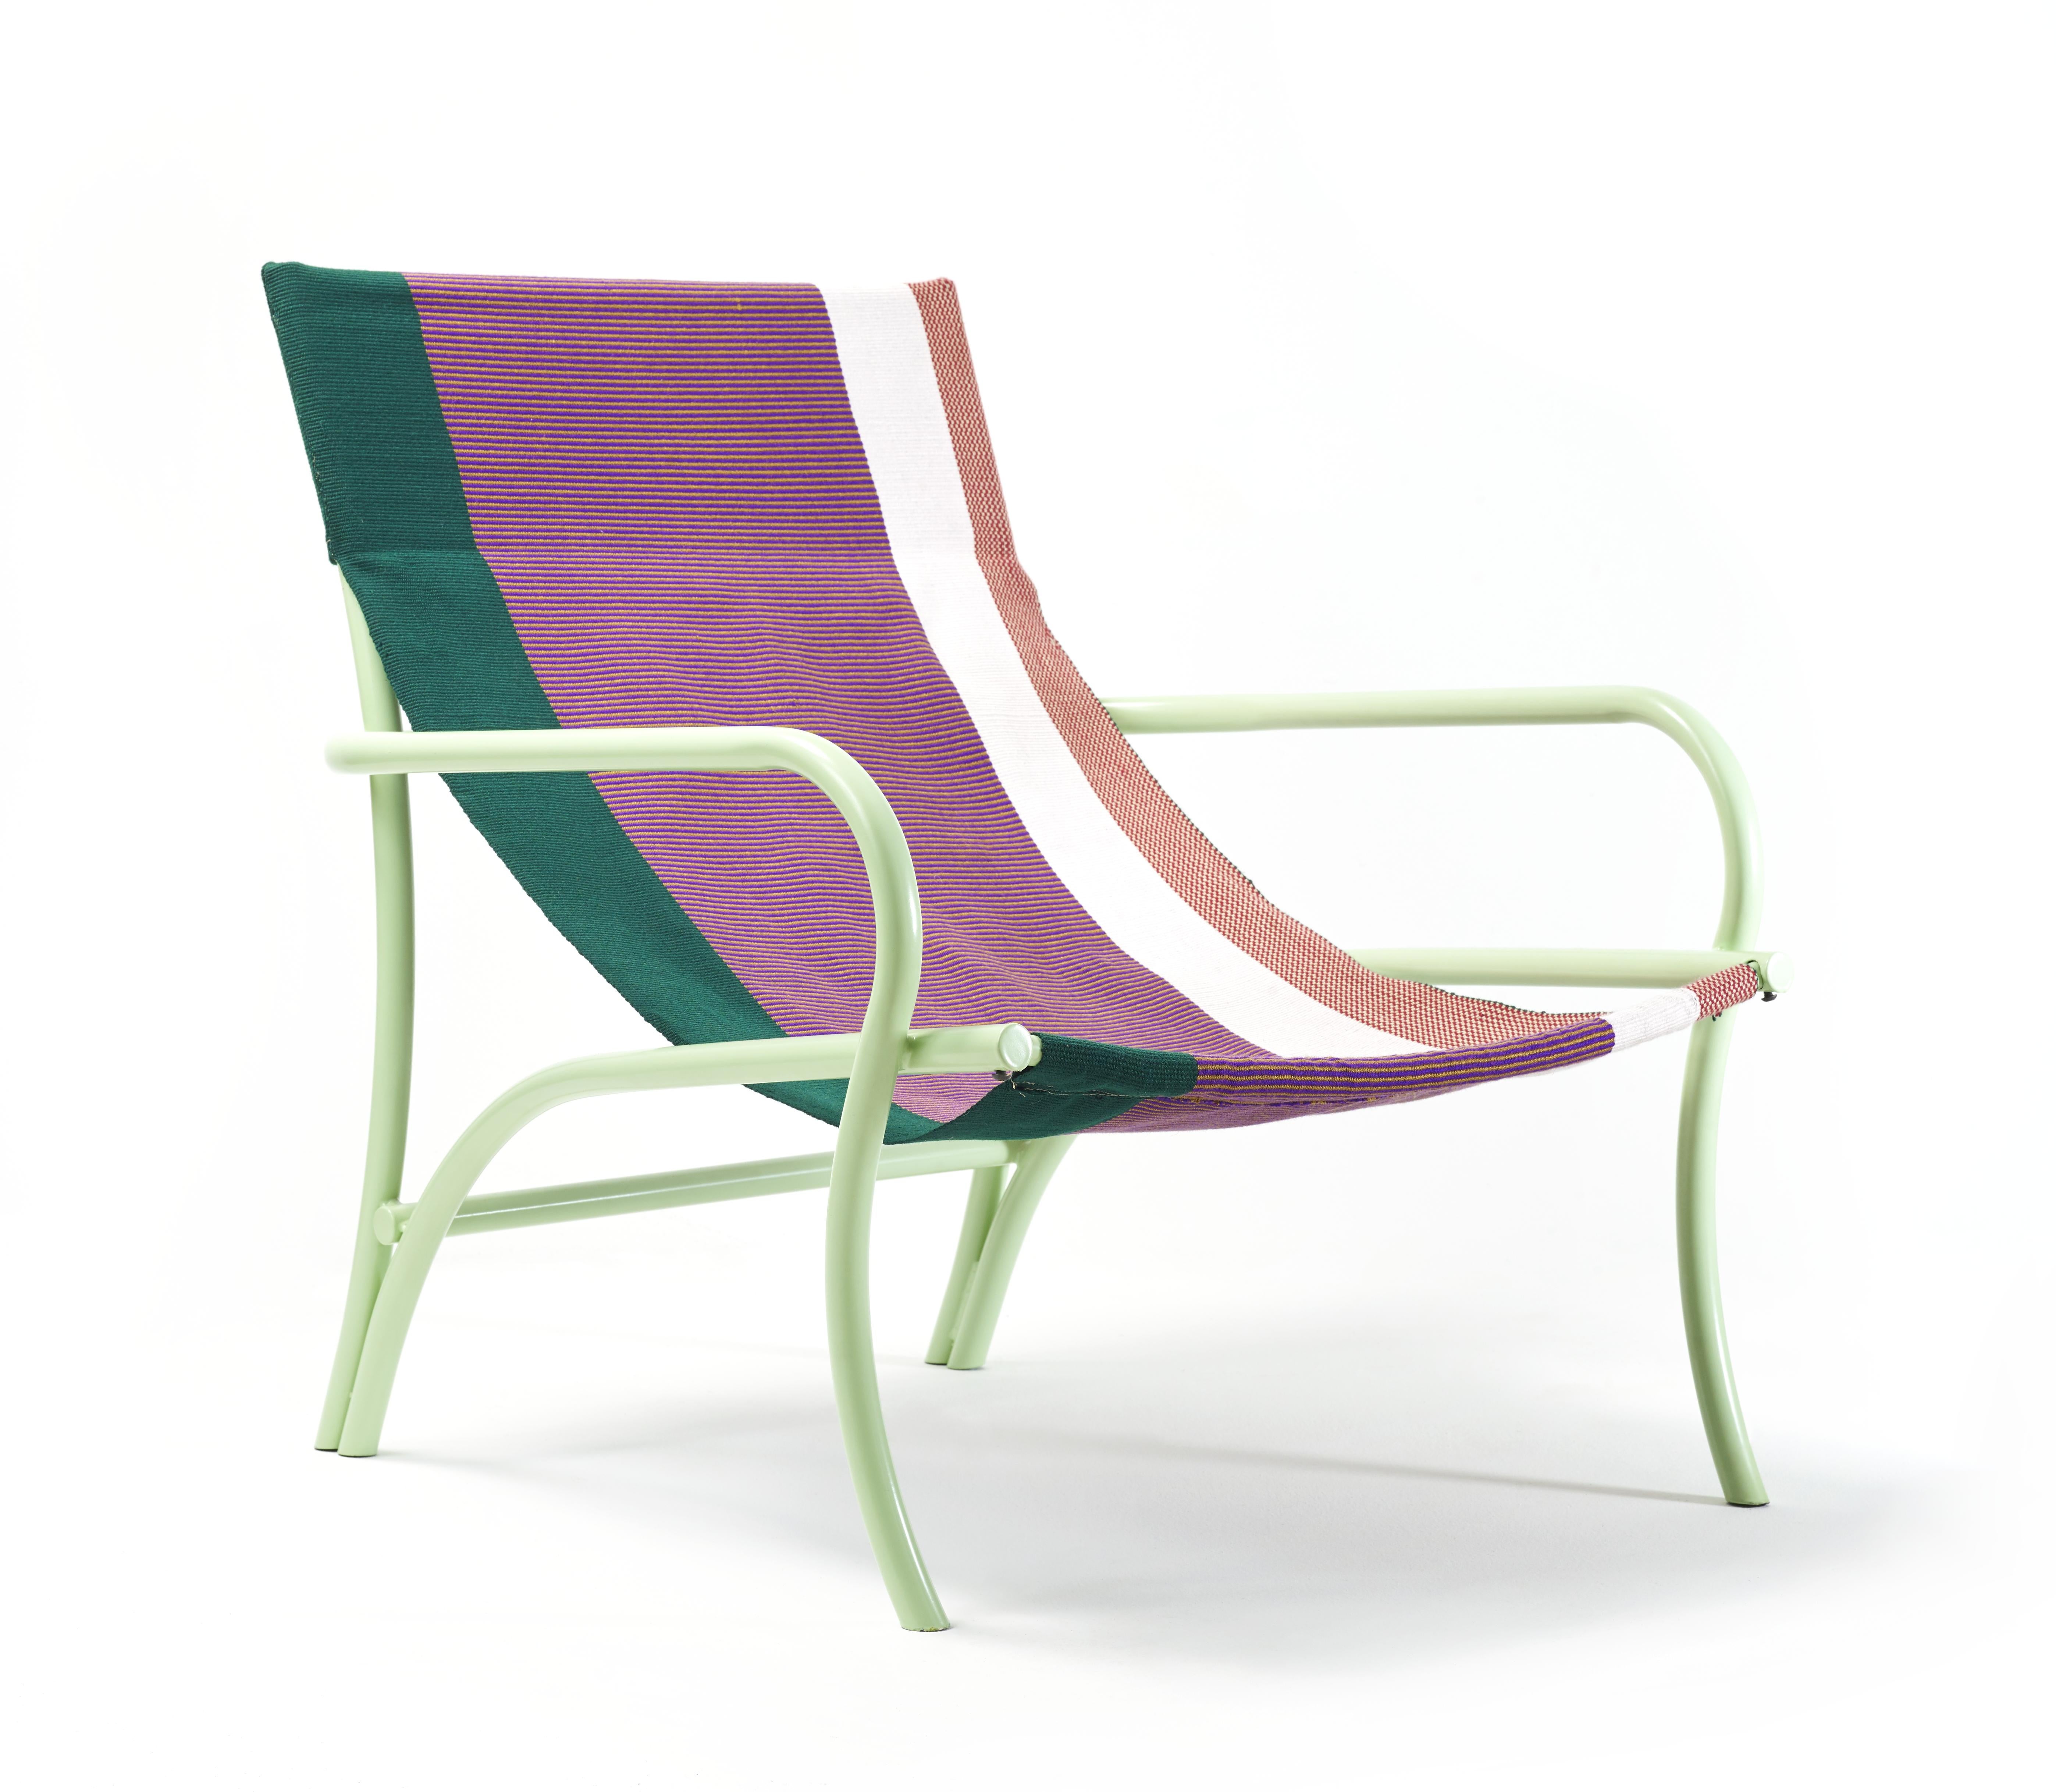 Set of 4 Verde Maraca lounge chair by Sebastian Herkner
Materials: galvanized and powder-coated tubular steel. 100% cotton. 
Technique: hand-woven with 100% cotton yarns.
Dimensions: W 72.7 x D 86.7 x H 88.5 cm 
Available in colors: verde/ purpura/